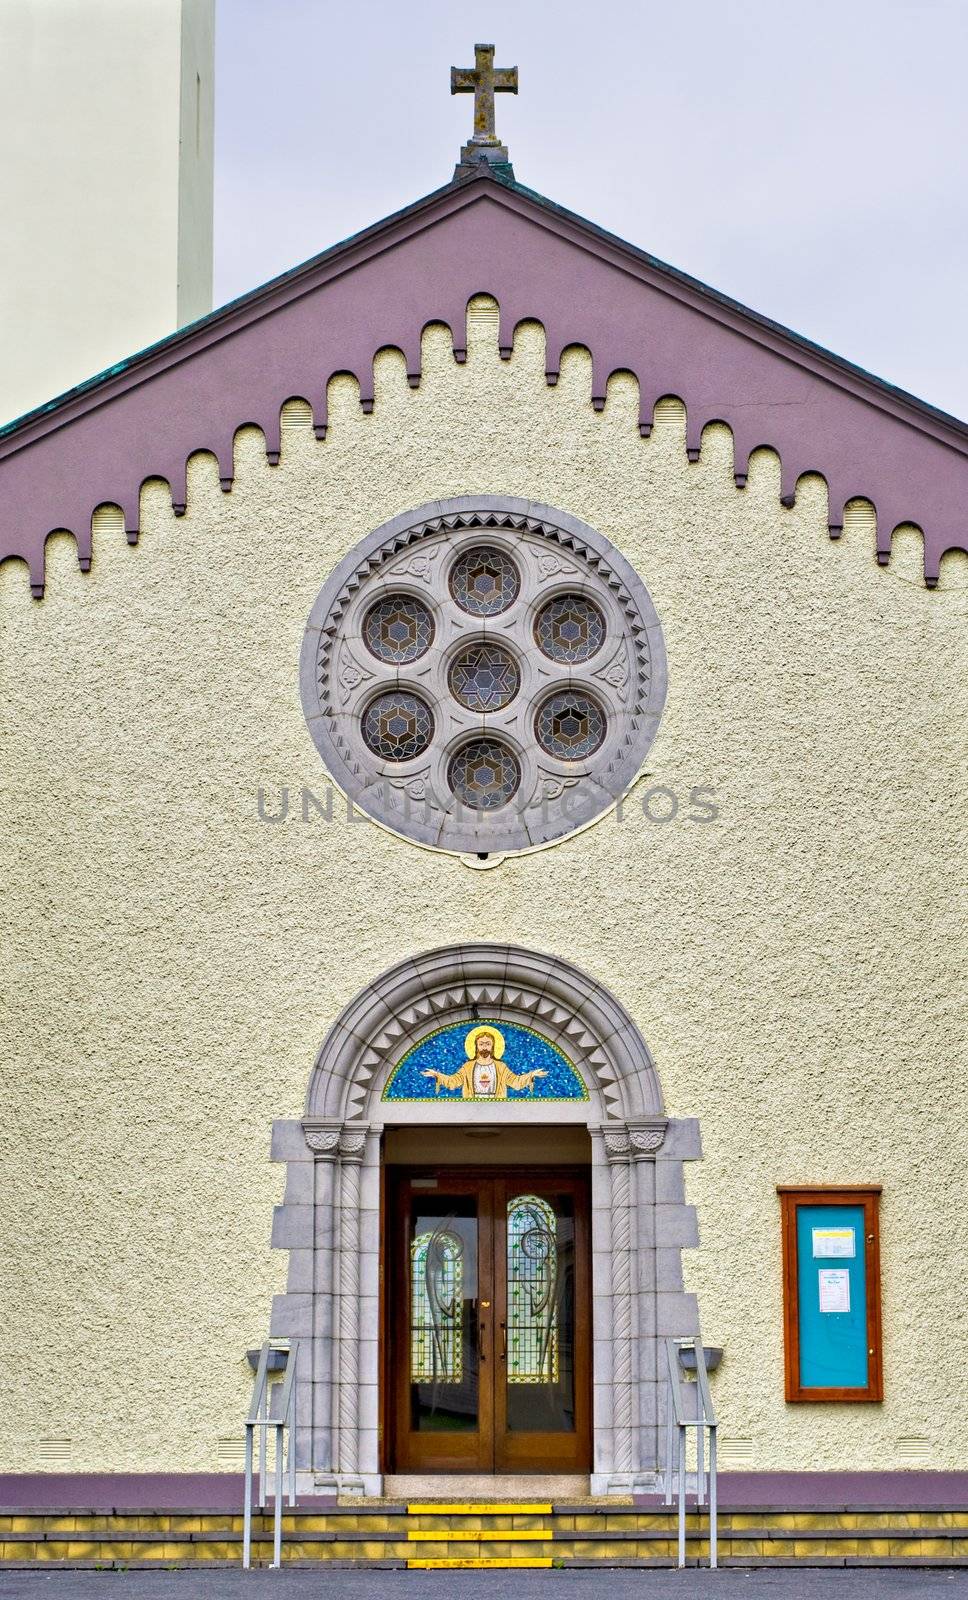 A church in Galway County, Ireland